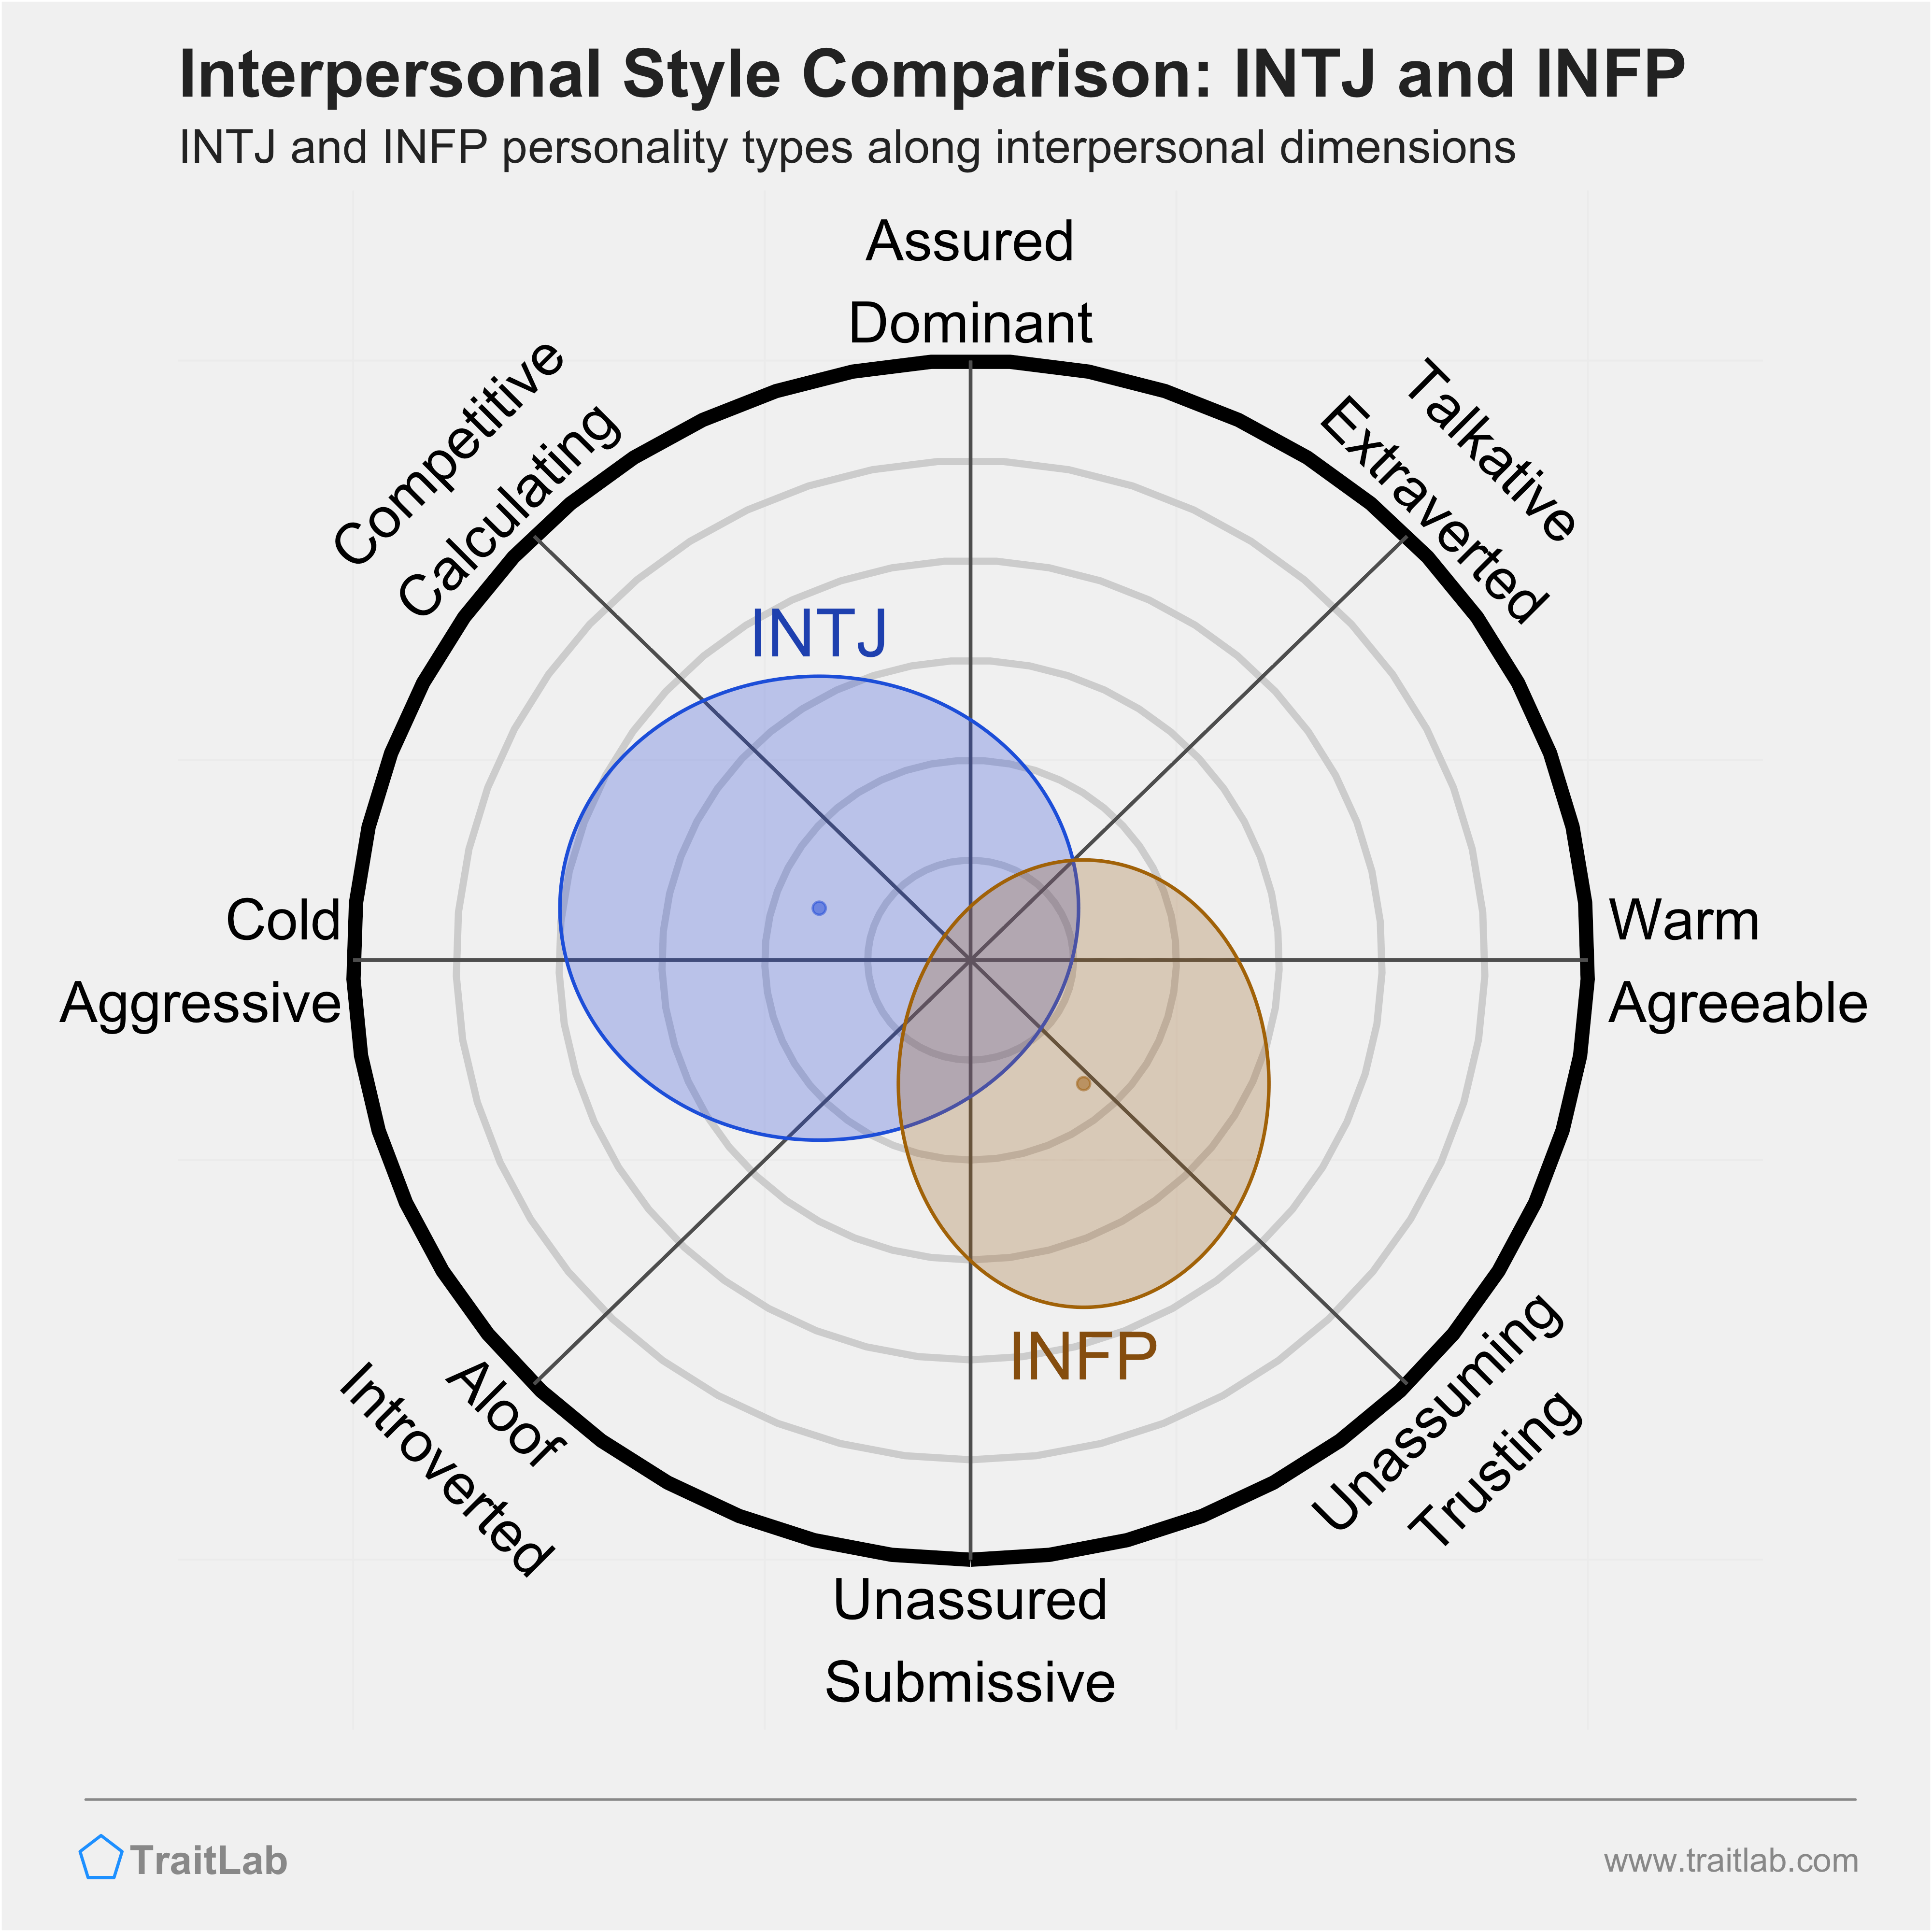 INTJ and INFP comparison across interpersonal dimensions